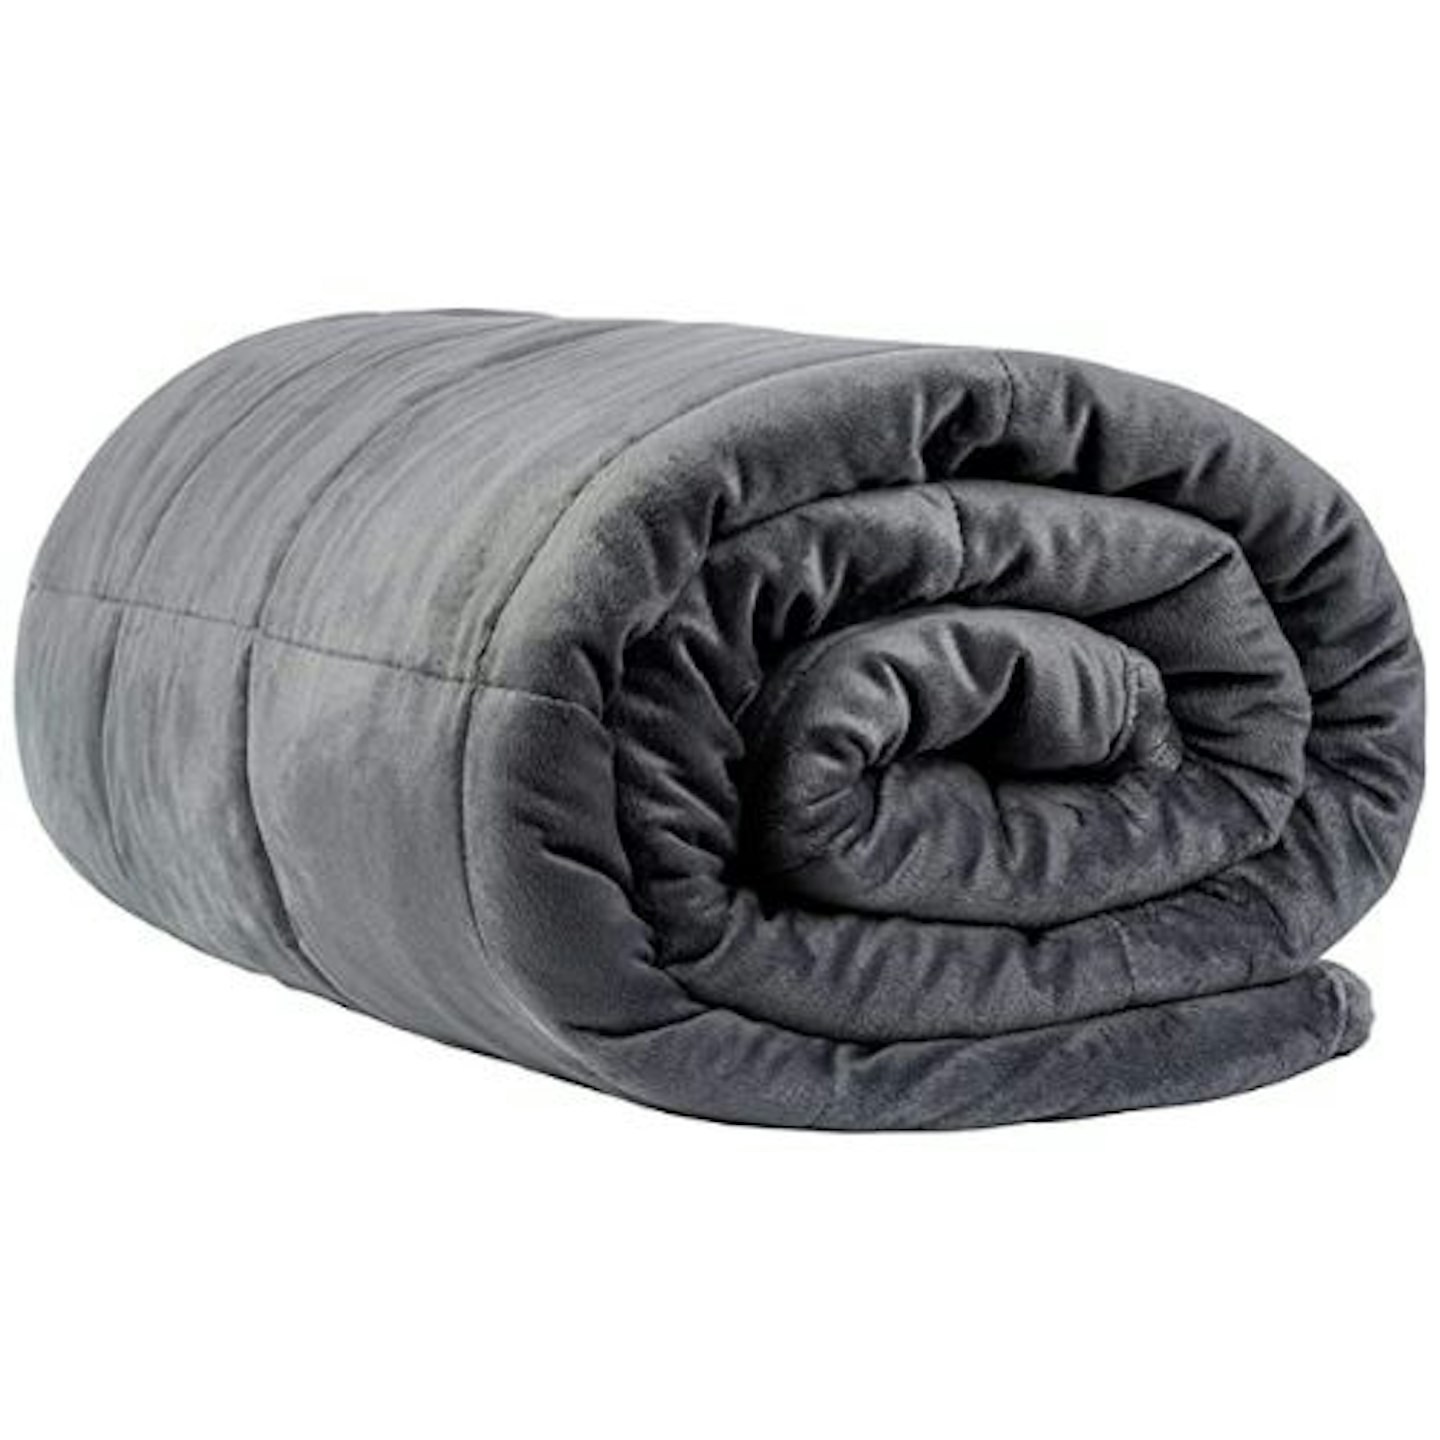 AGP Weighted Blanket